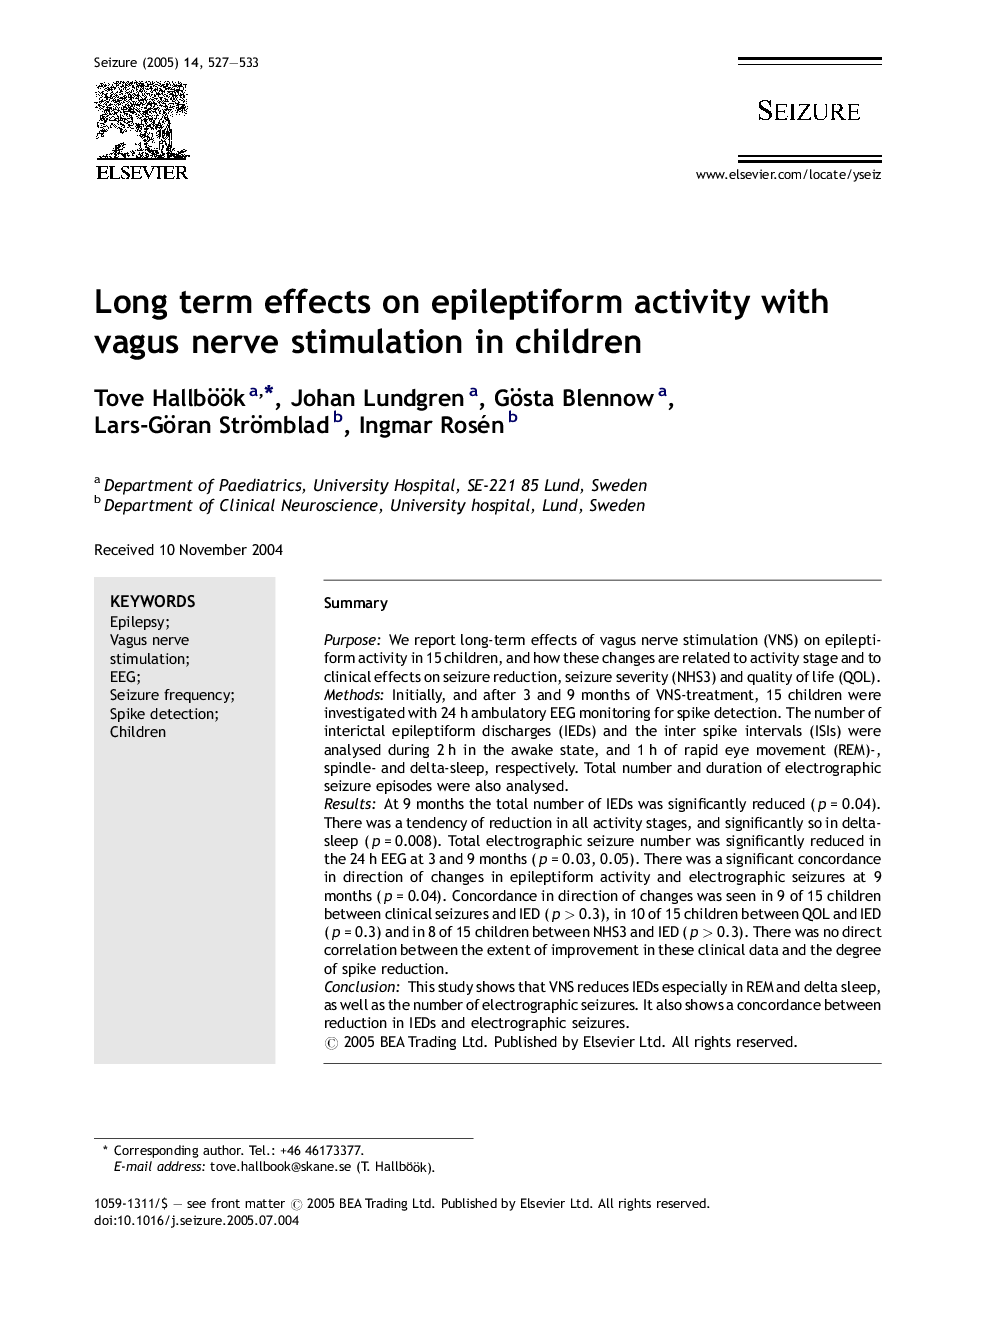 Long term effects on epileptiform activity with vagus nerve stimulation in children